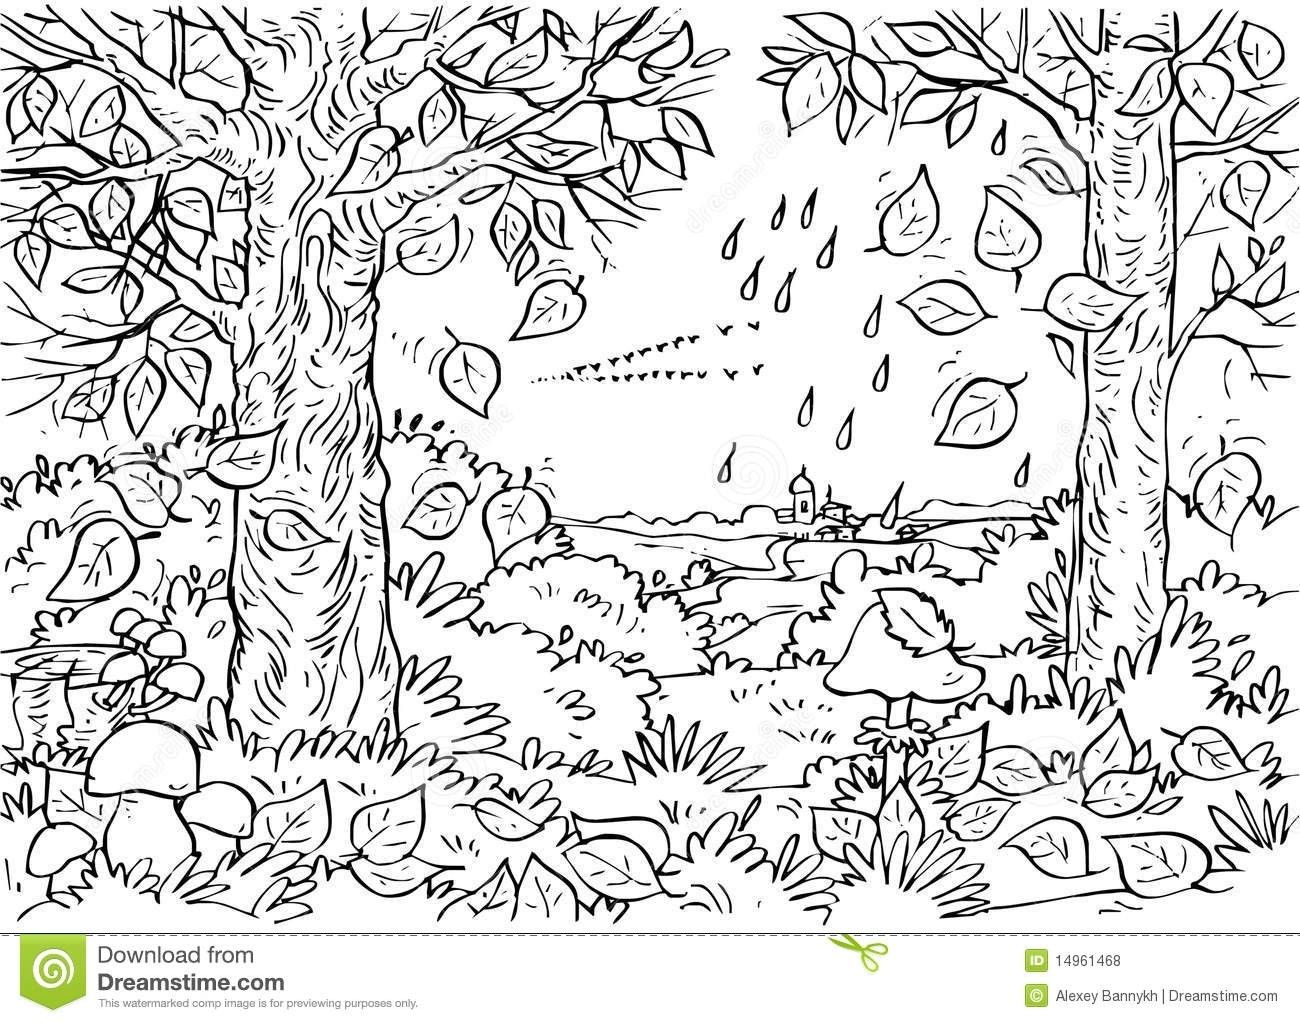 Awesome Forest Clipart Black And White Collection Digital